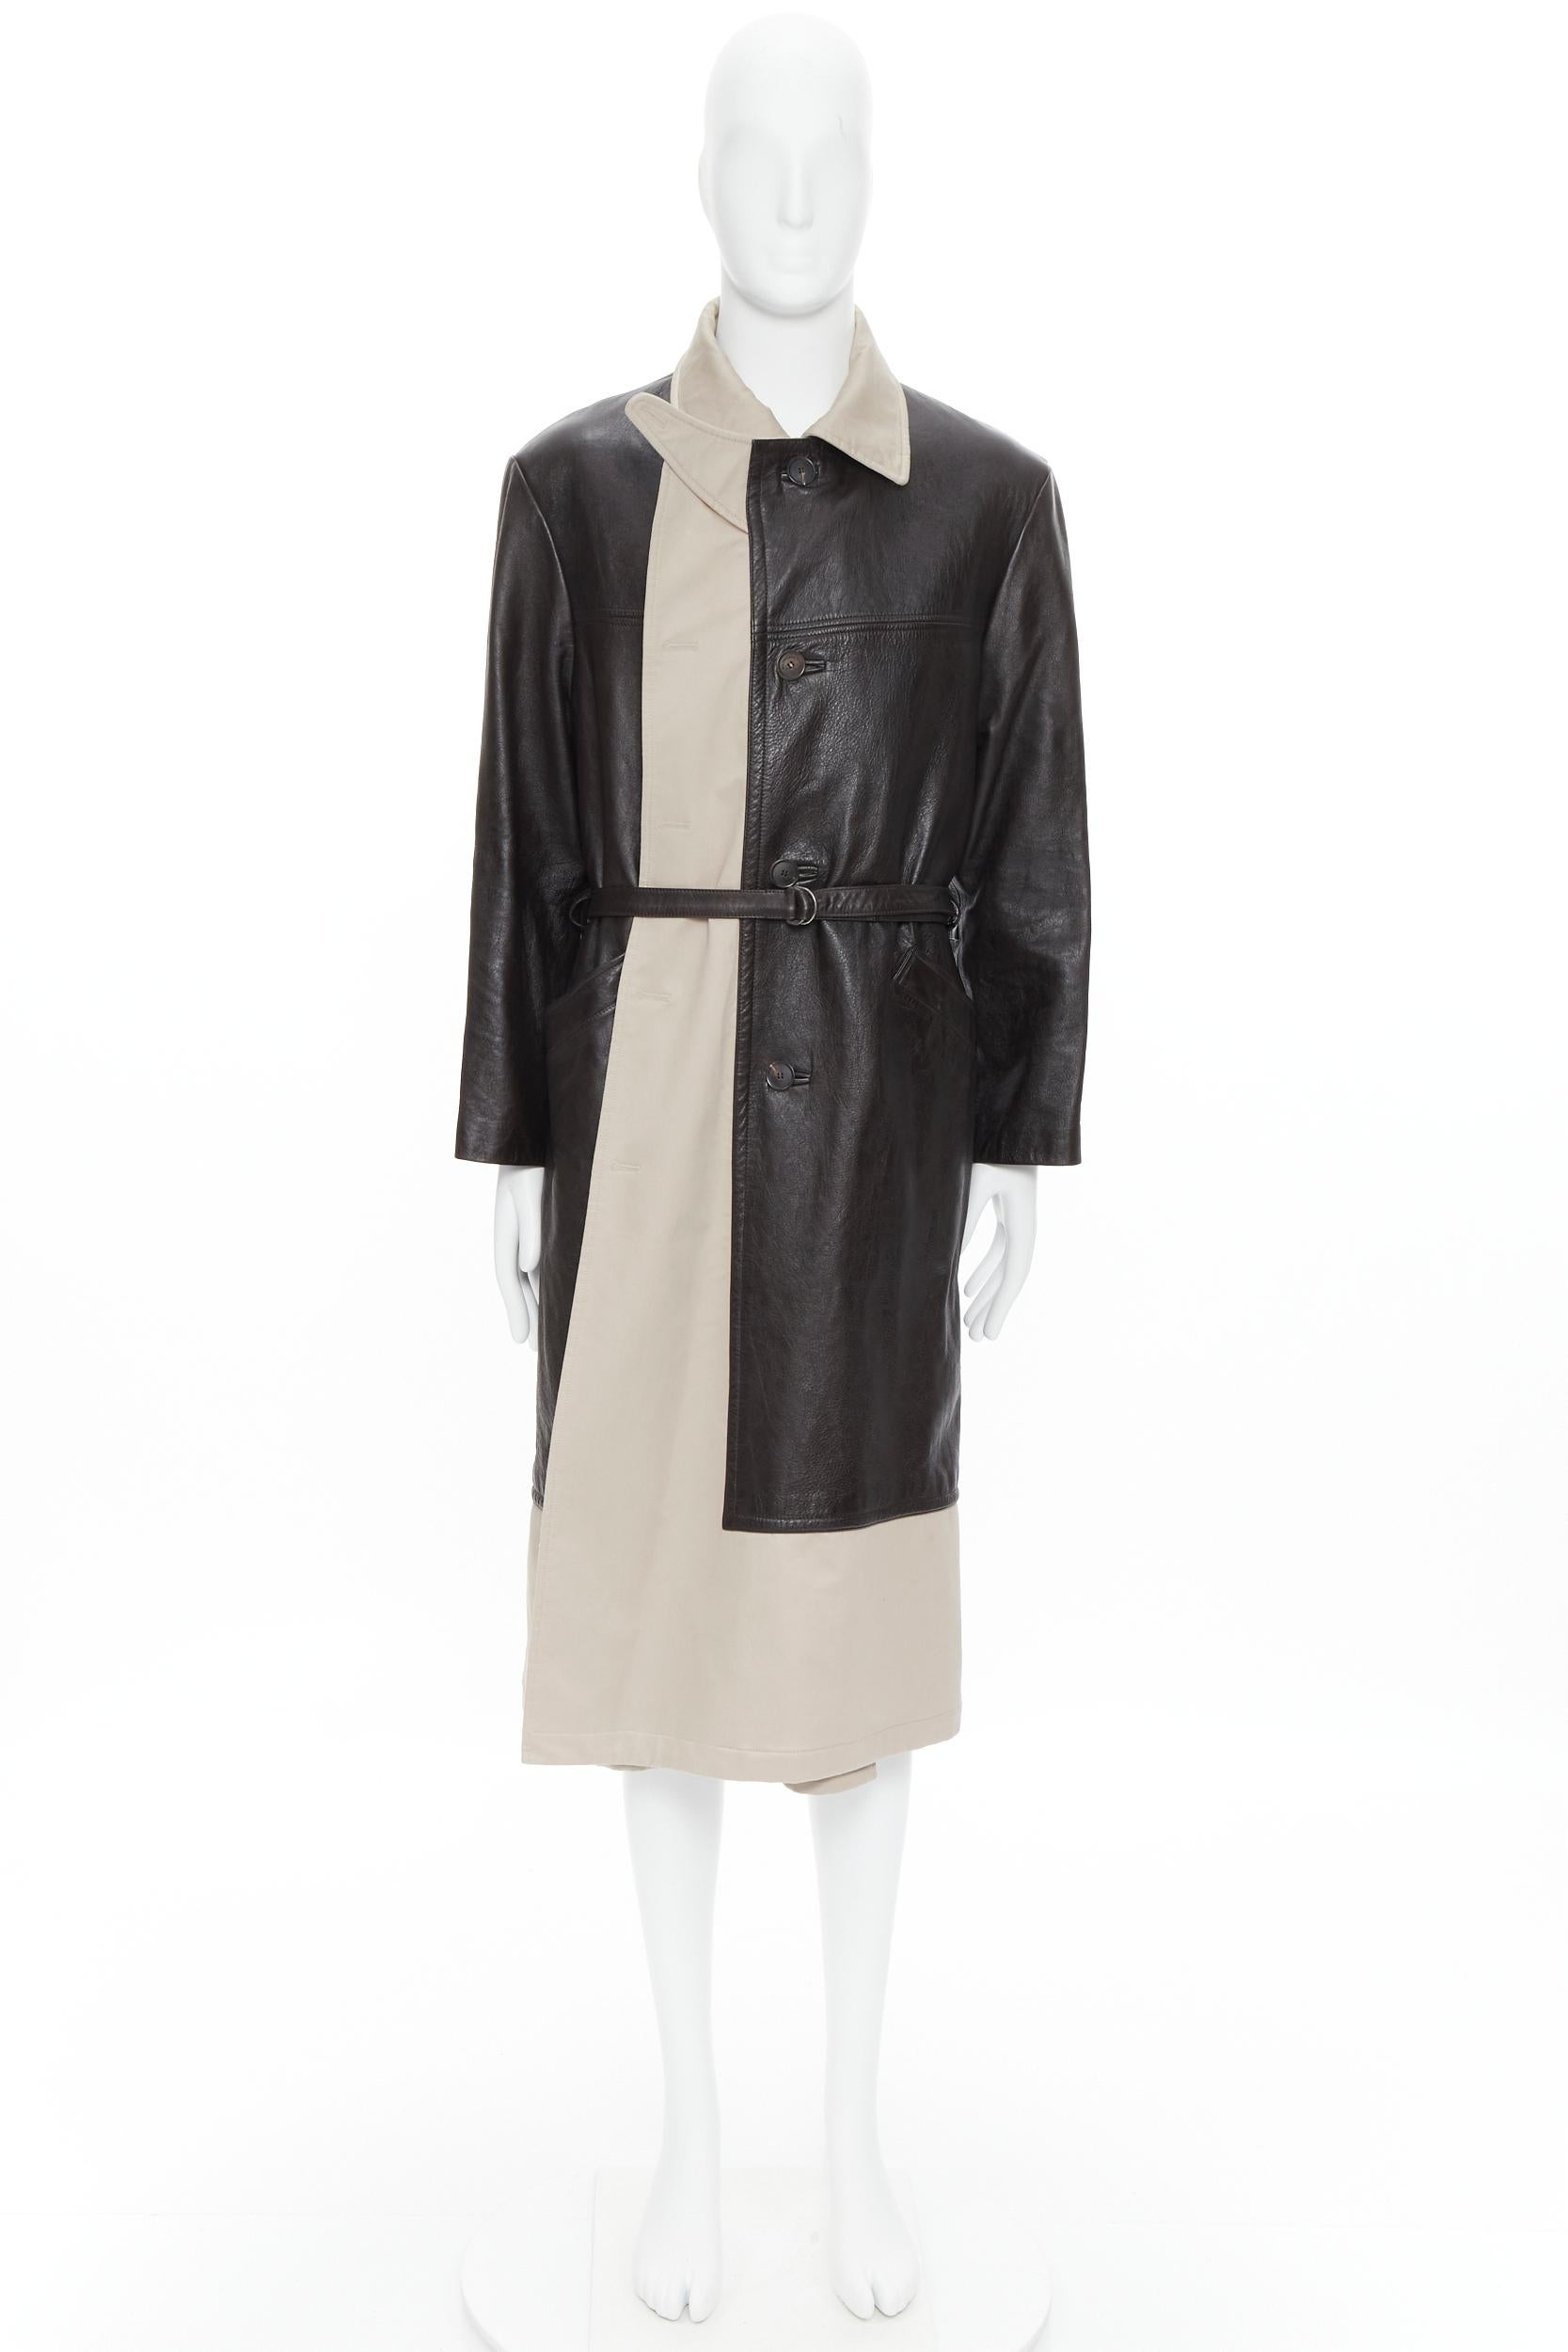 BALENCIAGA Fake Layering black leather beige trench belted coat M 4